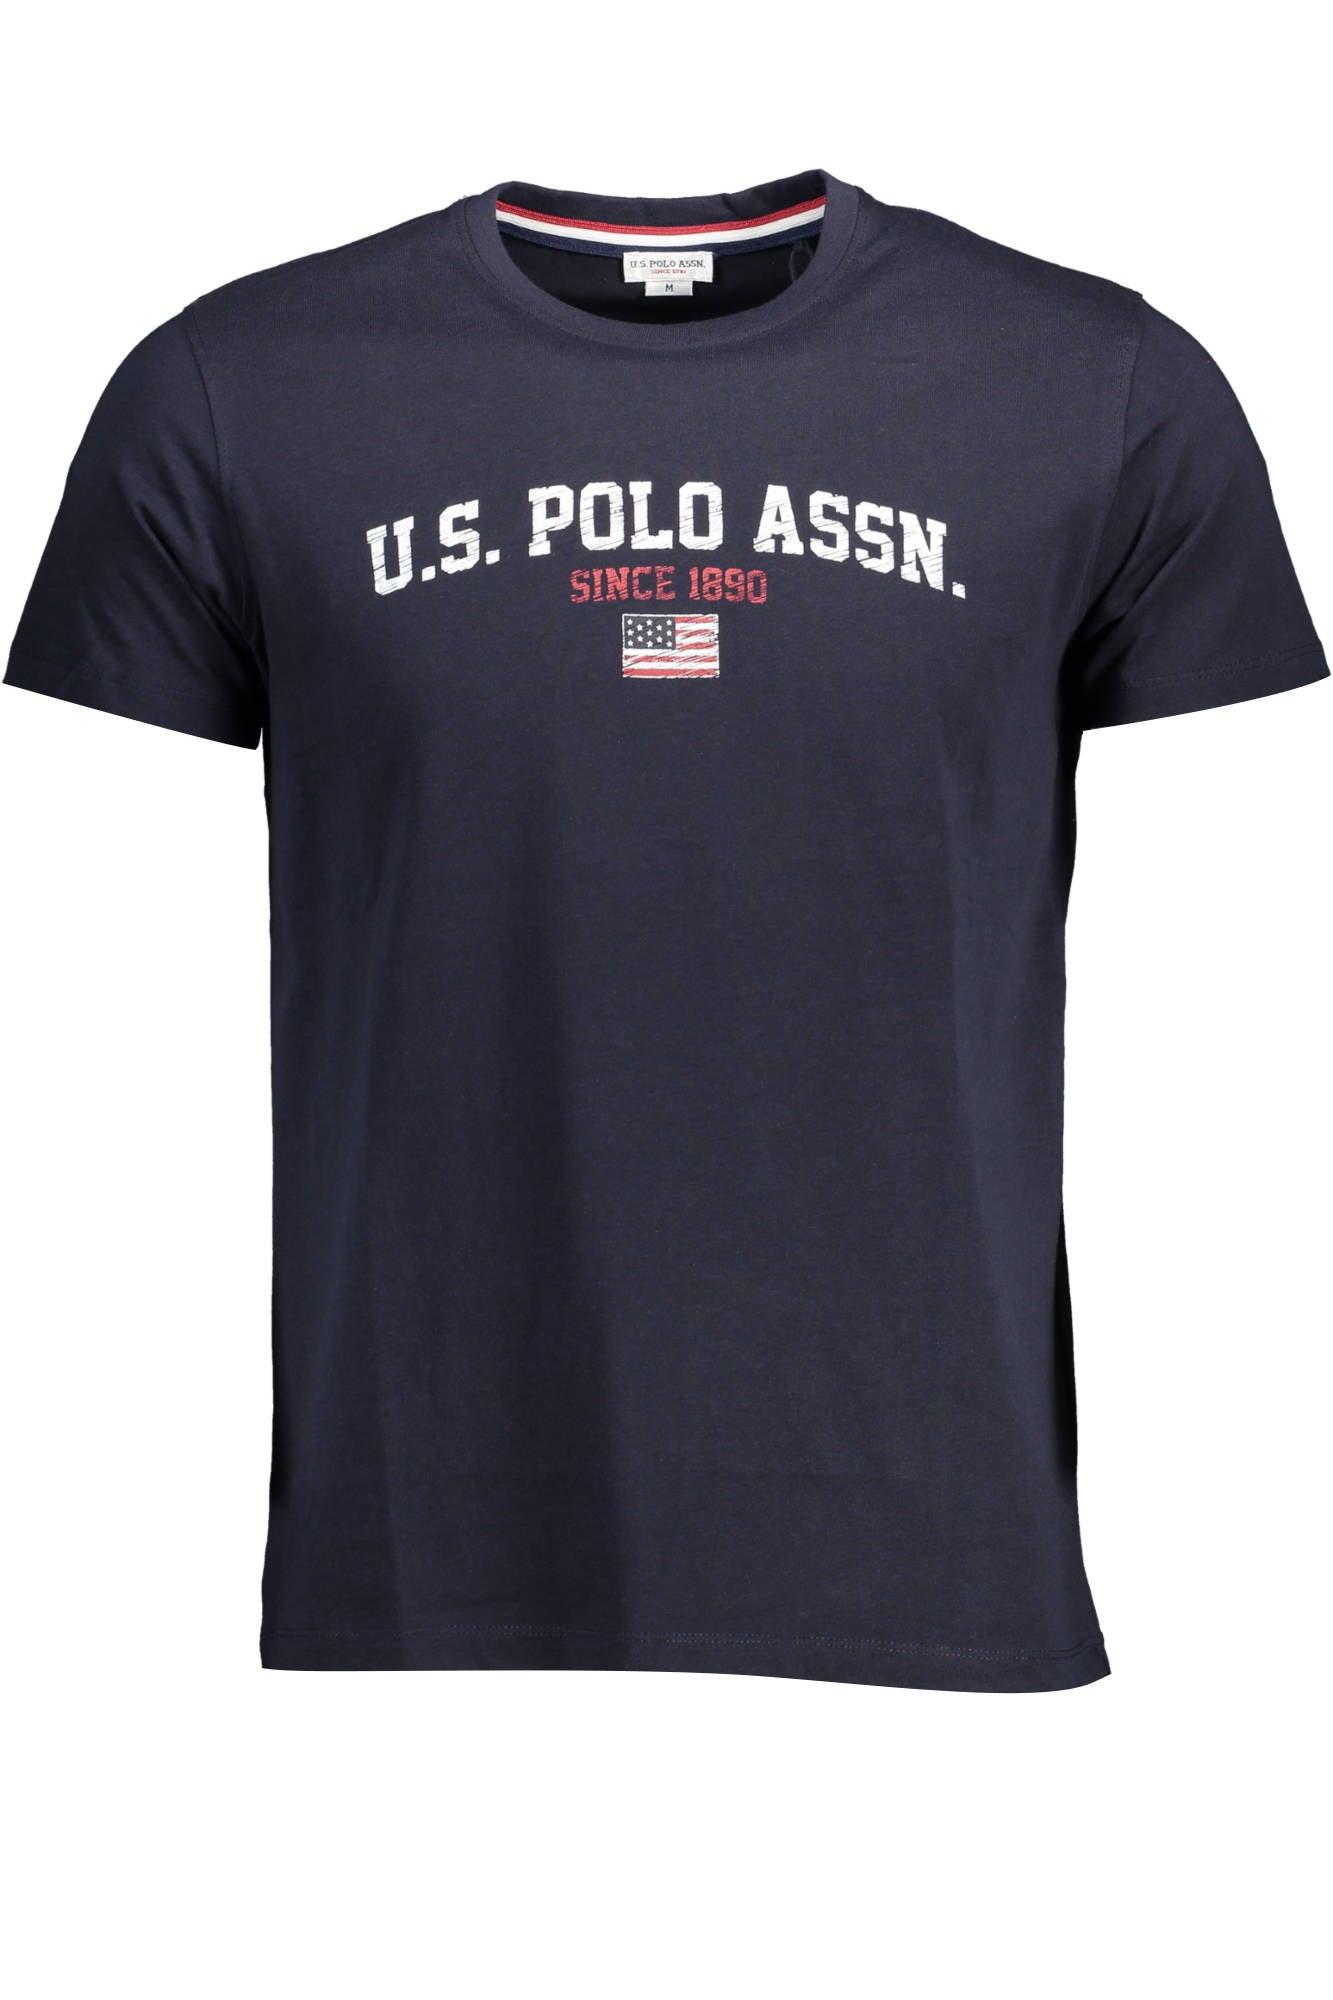 U.S. POLO ASSN. Cotton T-shirt in Black for Men | Lyst